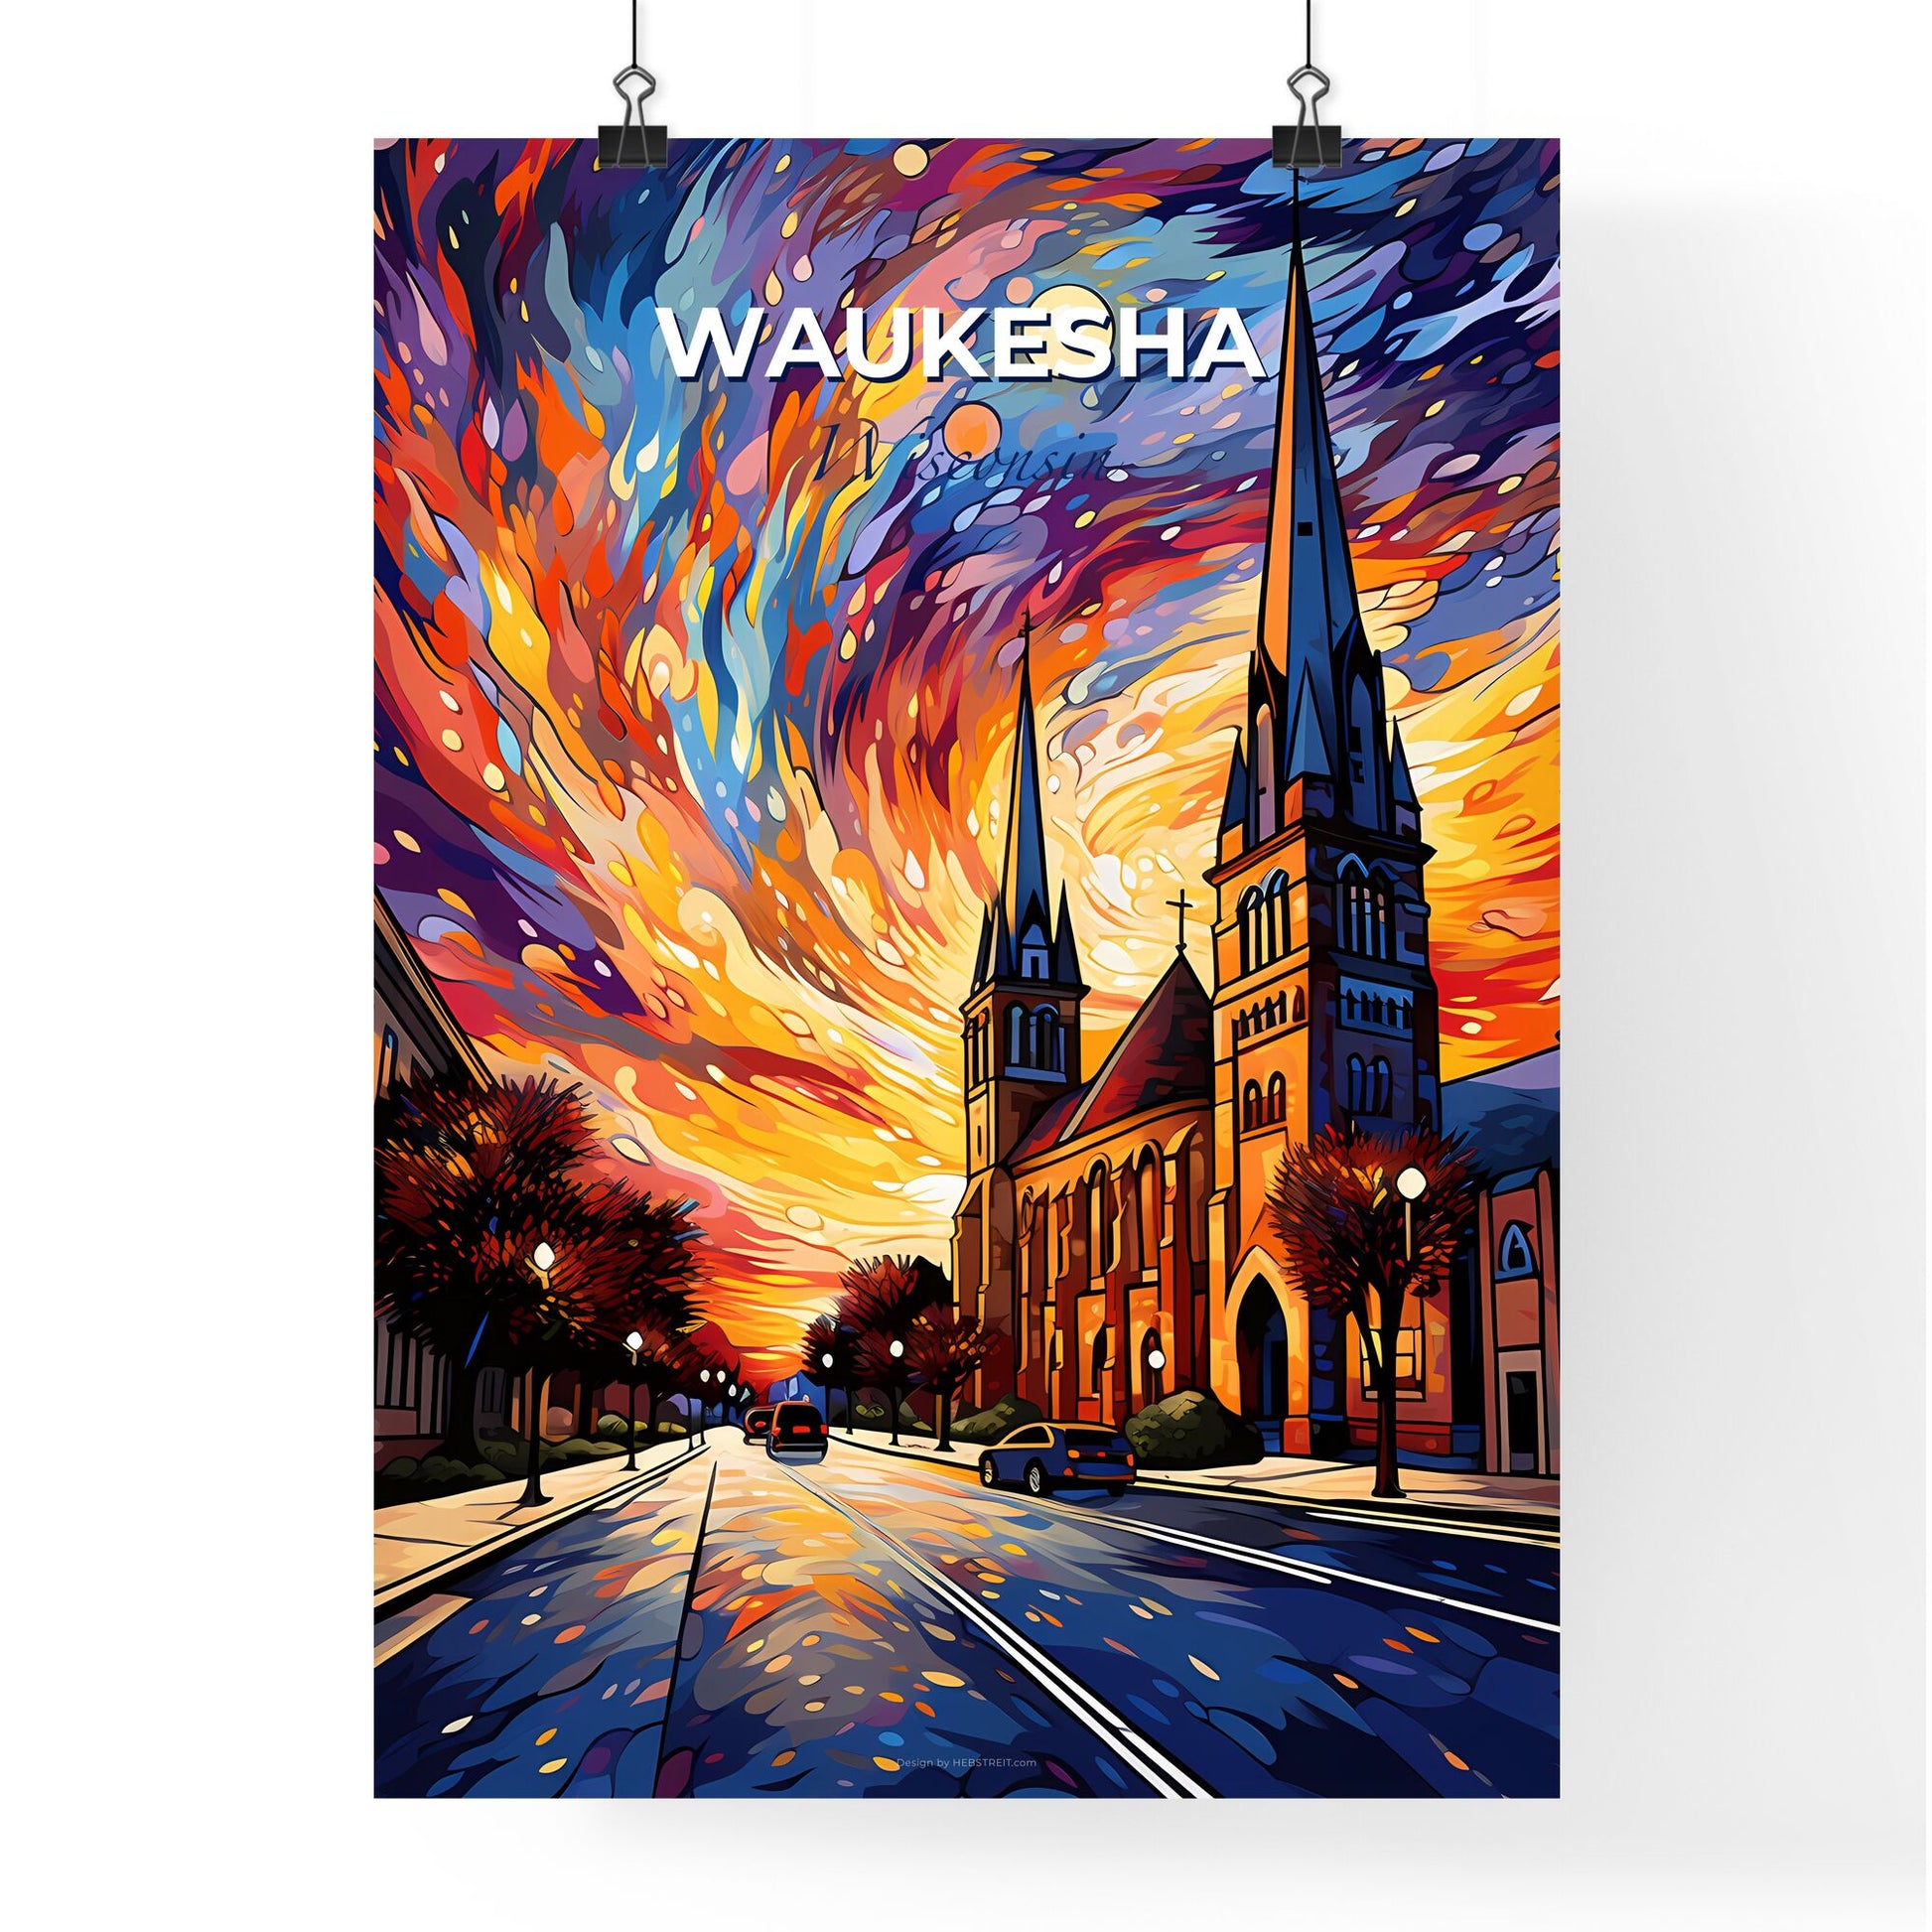 Waukesha, Wisconsin, A Poster of a colorful sky over a church Default Title